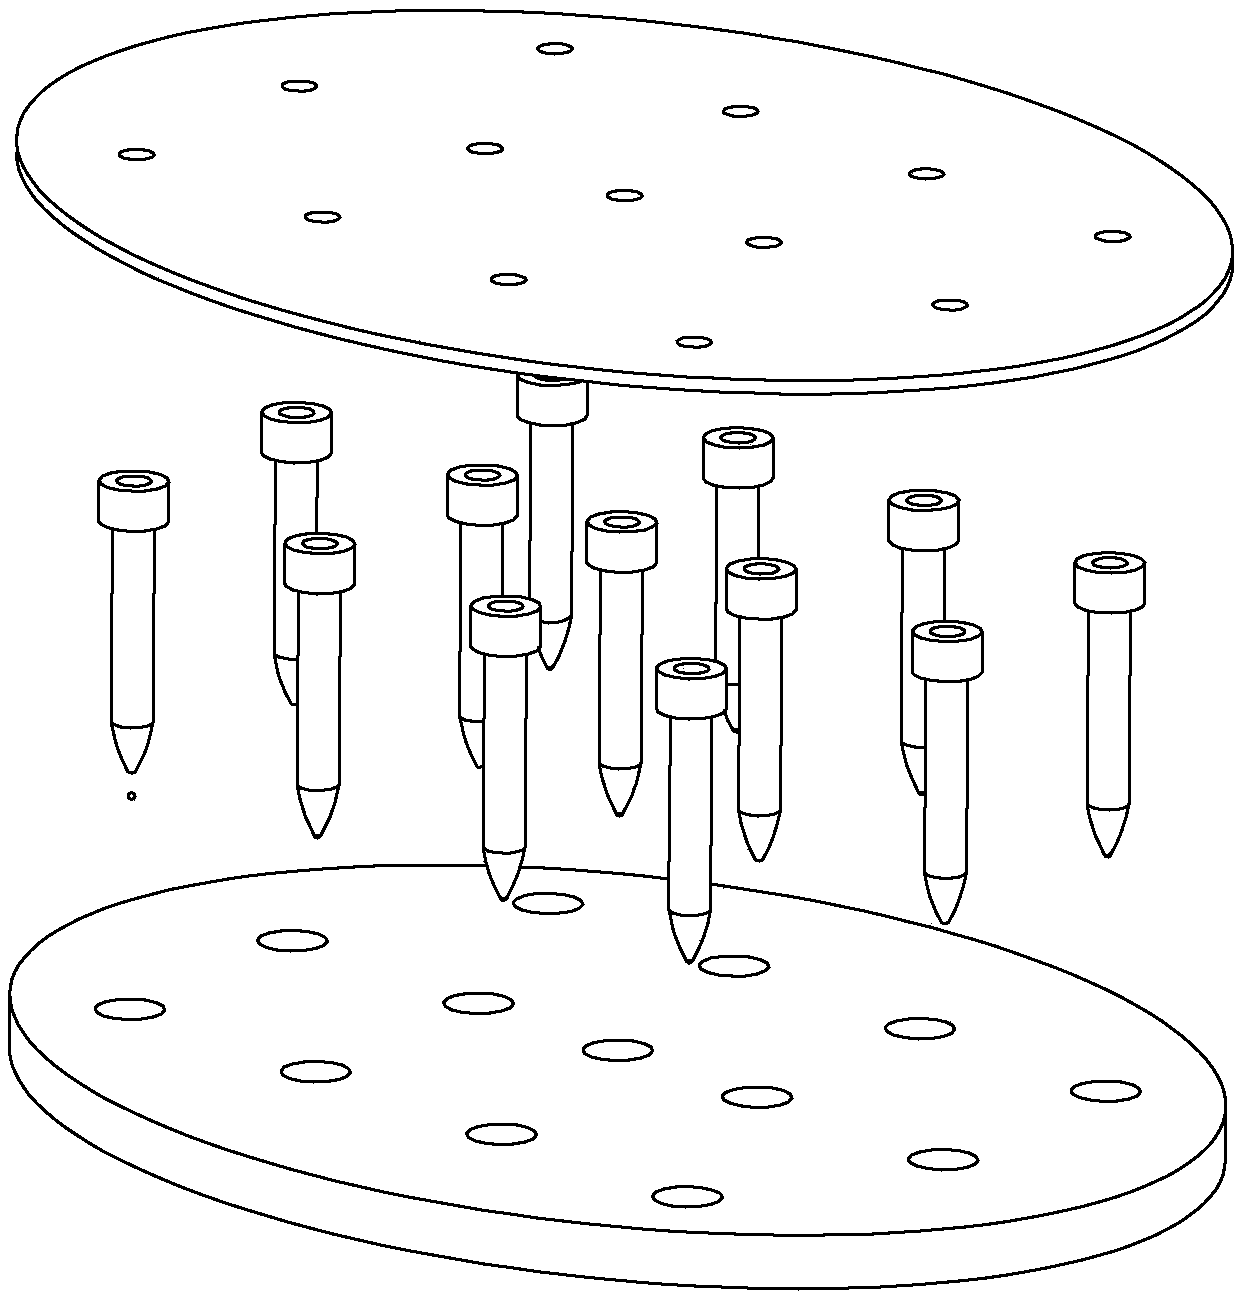 Comb with comb teeth similar to ball-pens with liquid discharging function